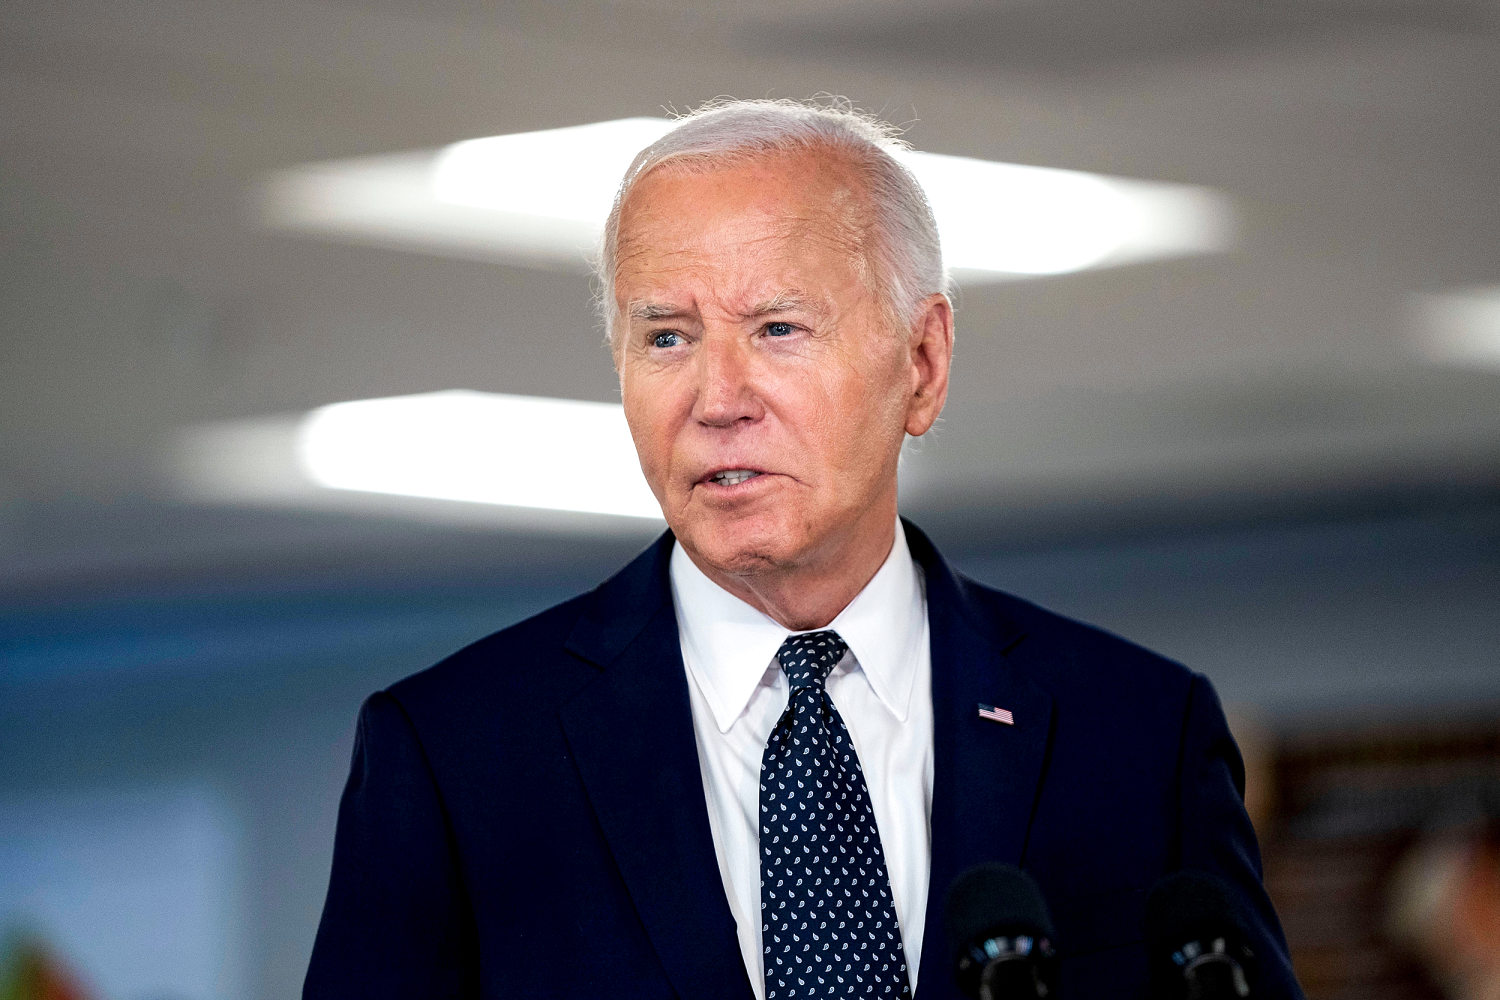 Rep. Alexandria Ocasio-Cortez supports Biden staying in the race after speaking with him